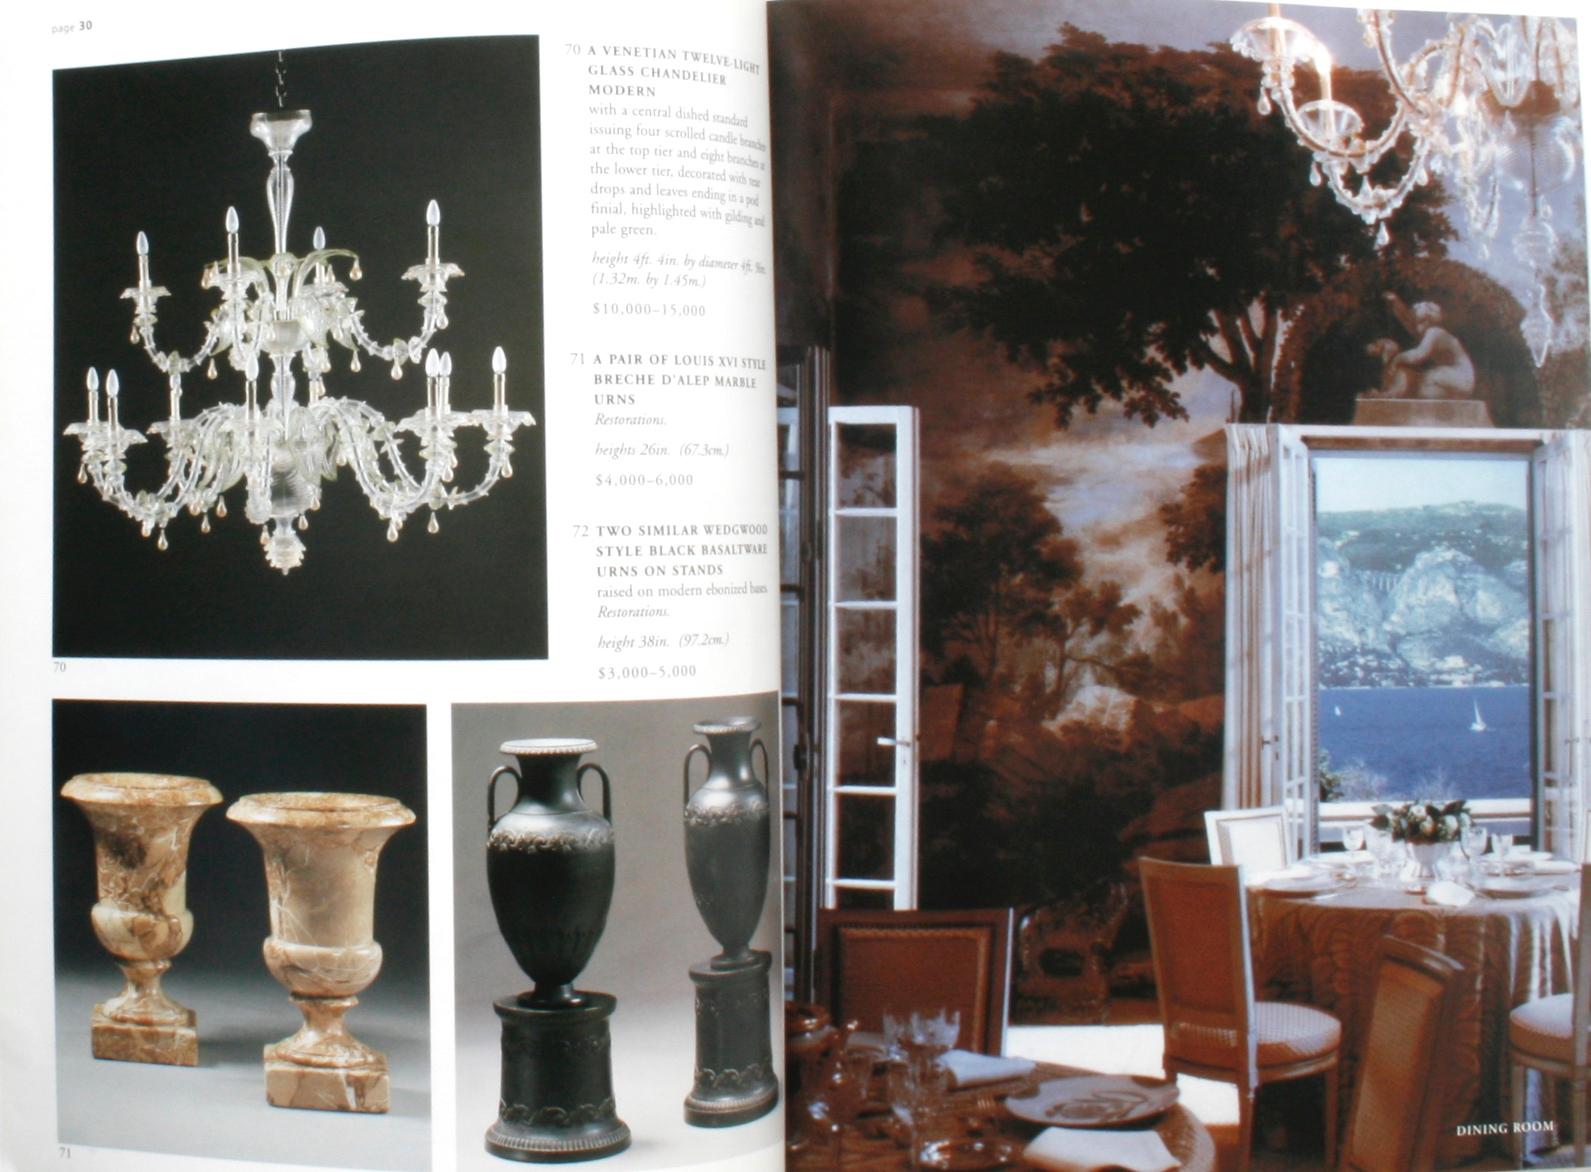 American Sotheby's, The Collection of Villa Fiorentina